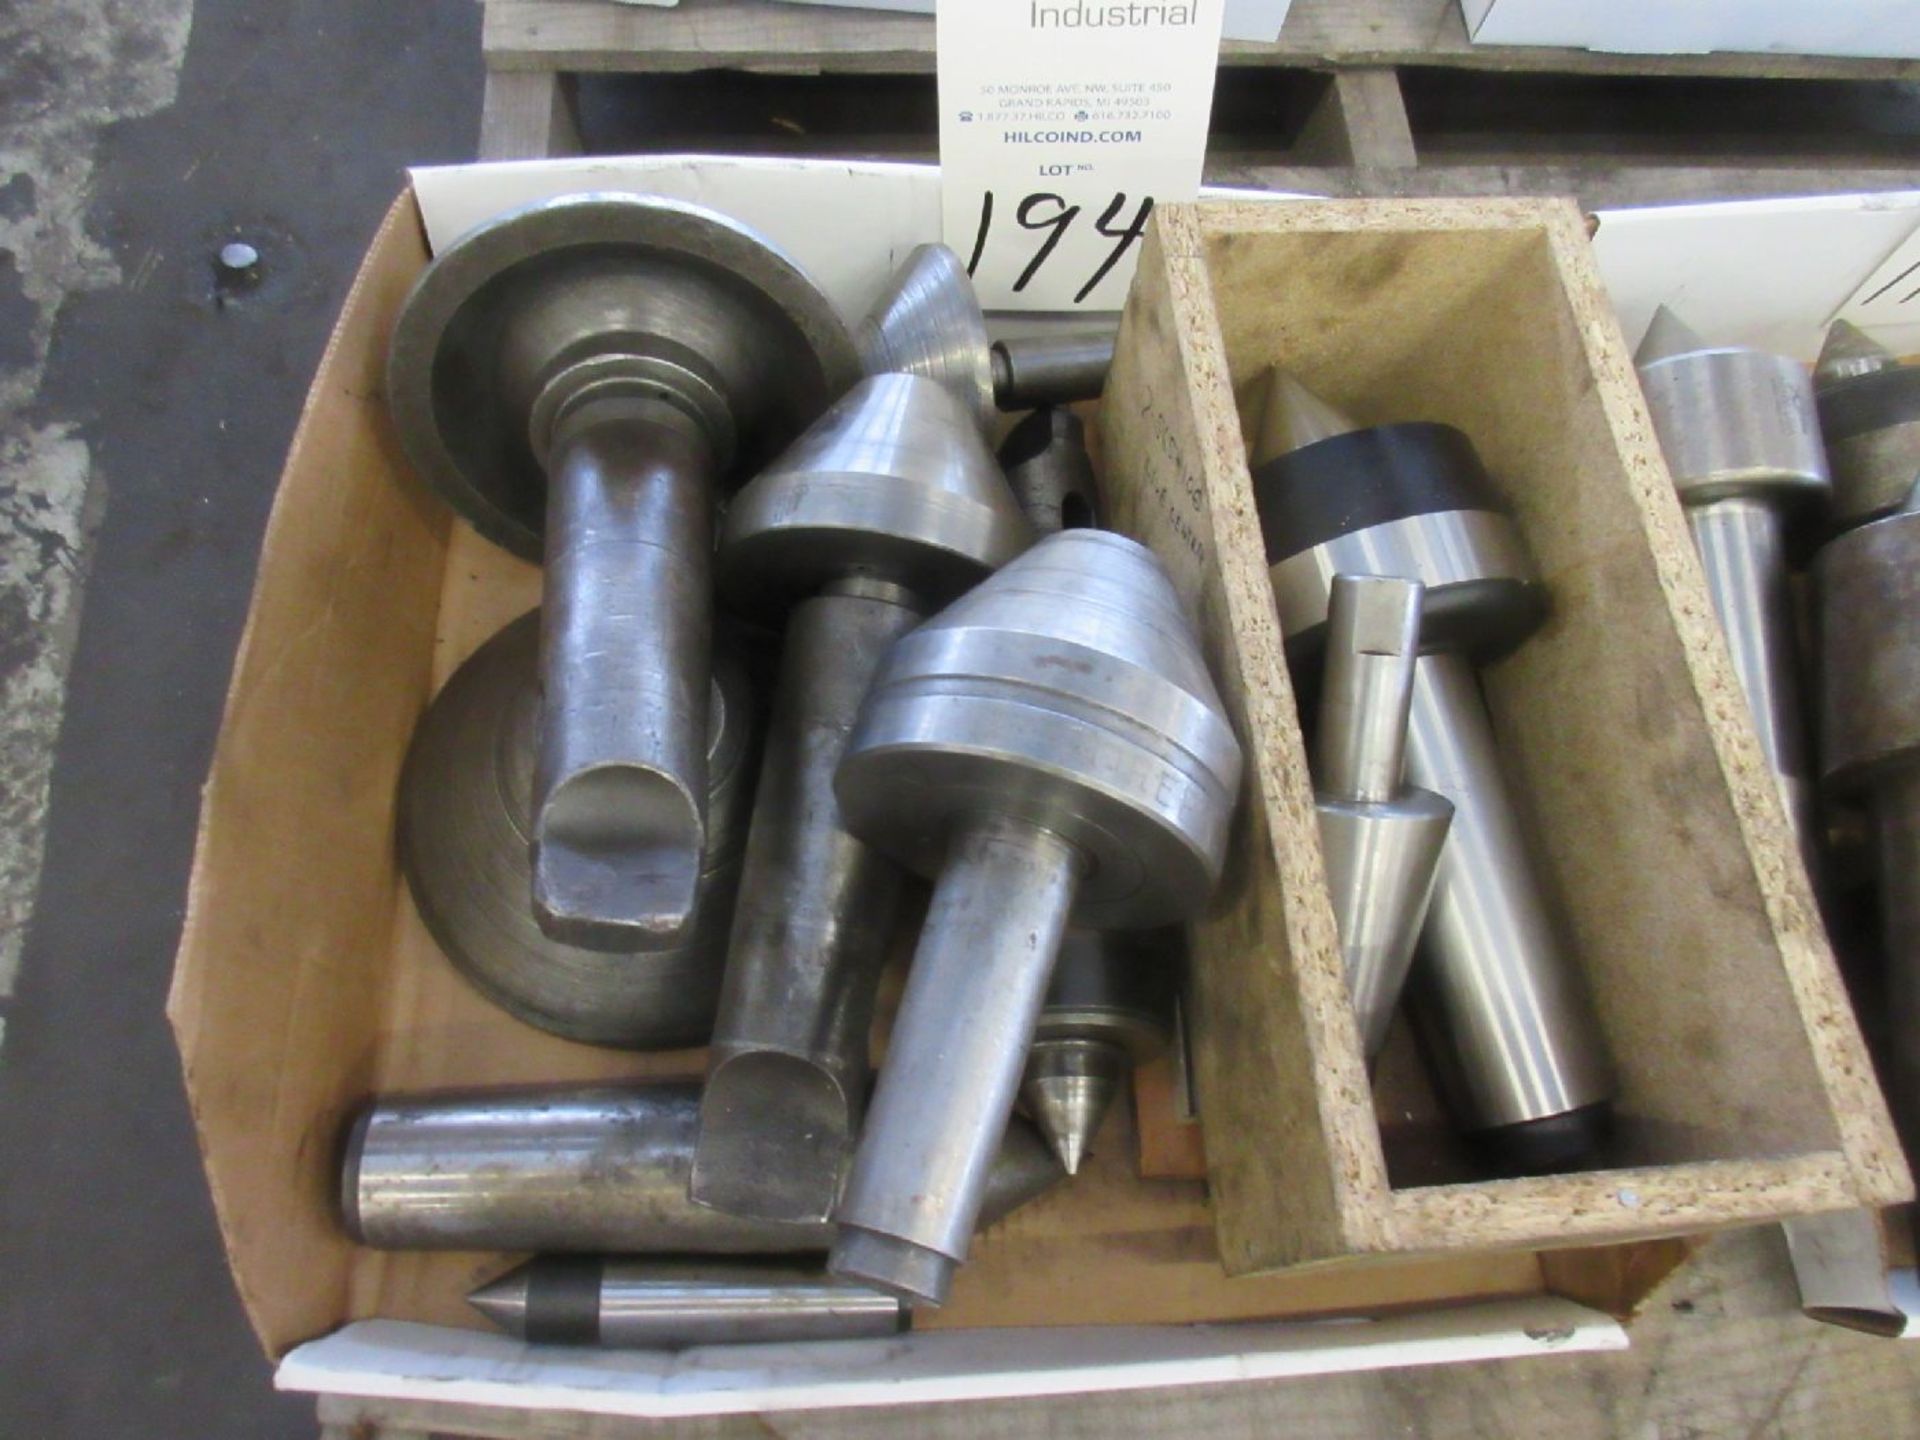 Assorted Lathe Center Tooling